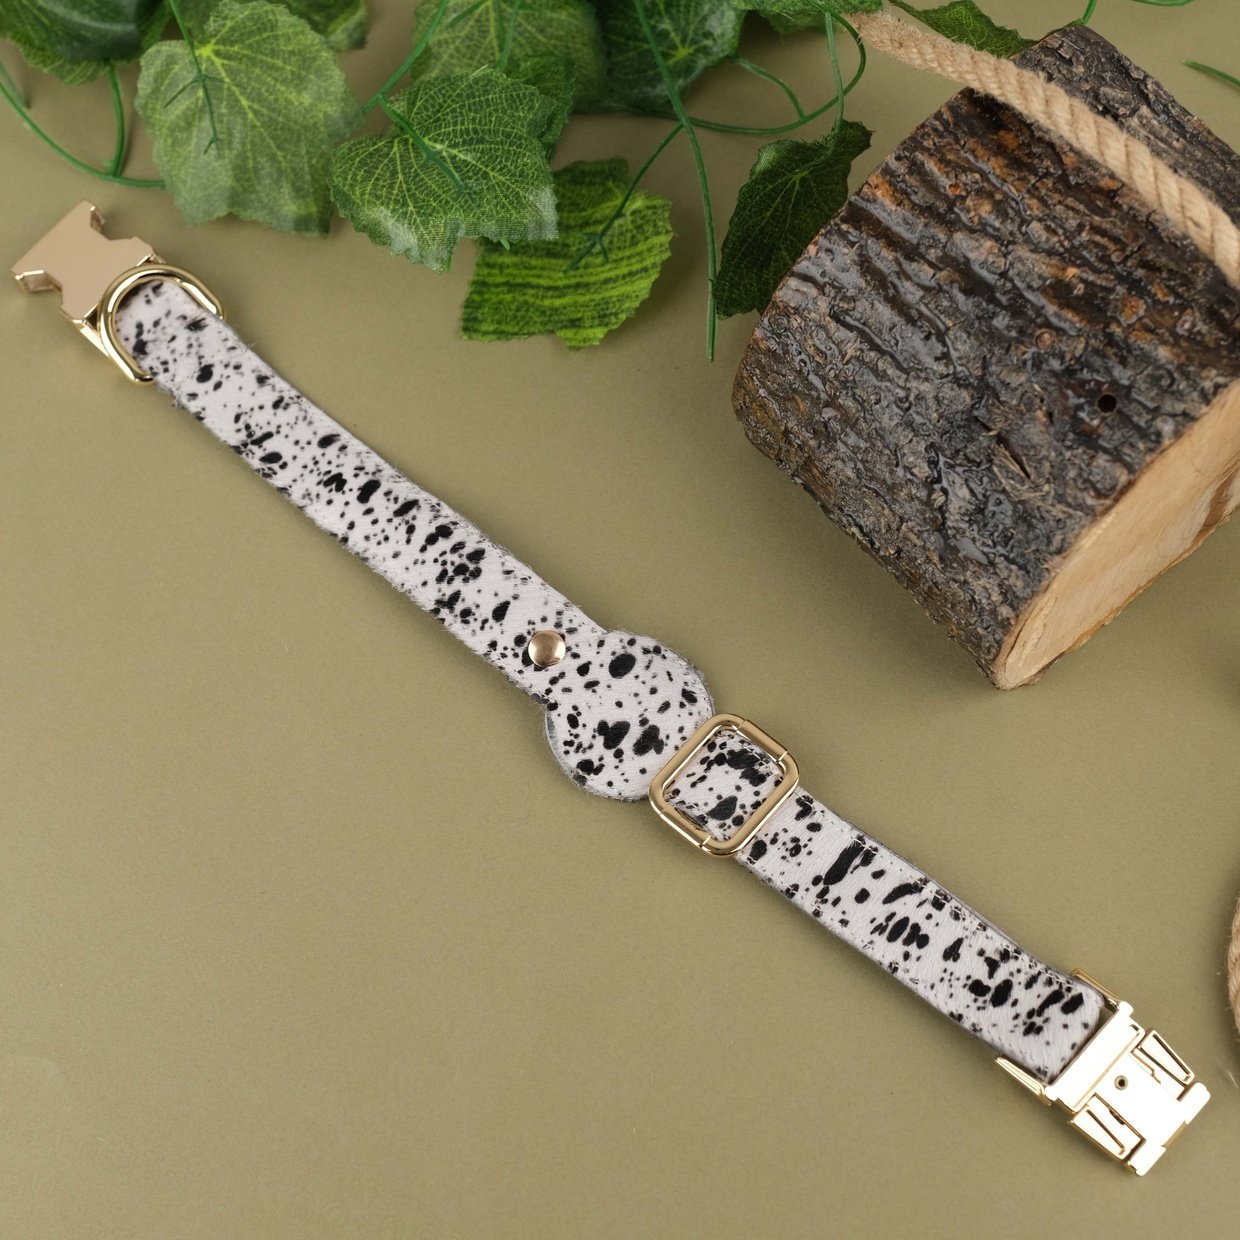 Dalmatian Handcrafted Leather Dog Collar with Airtag Slot